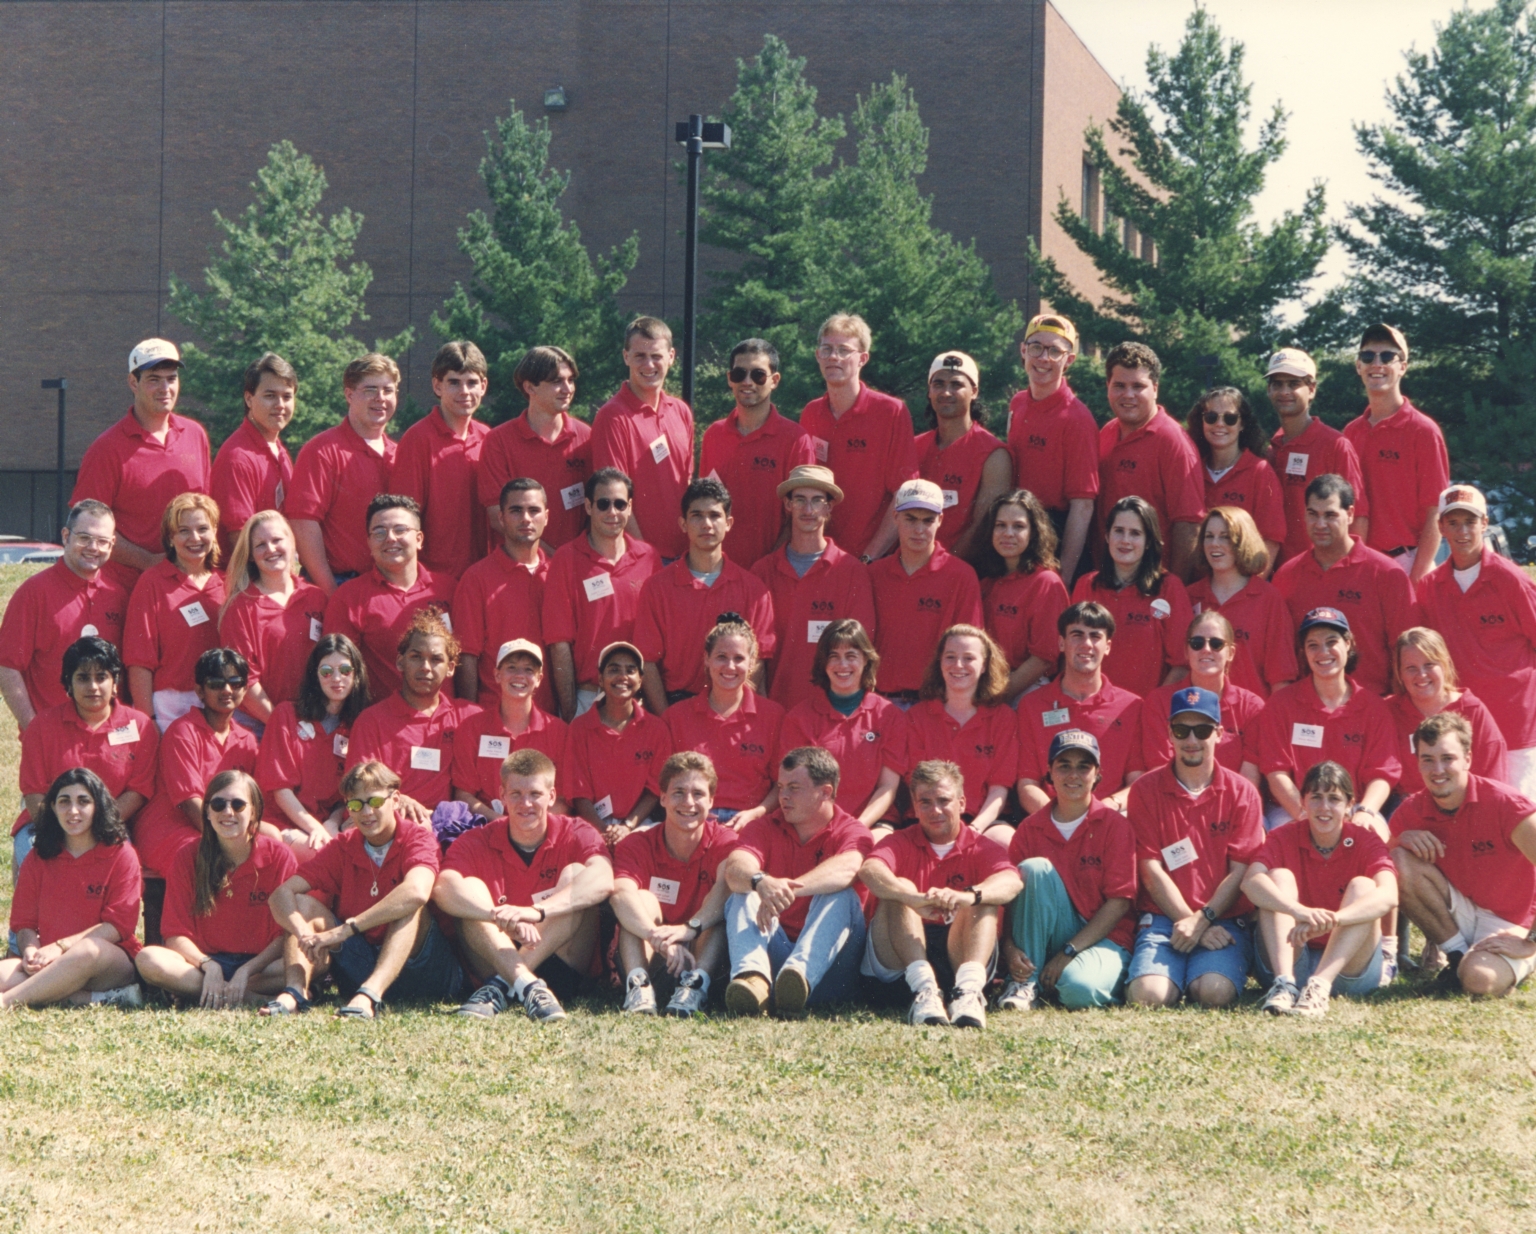 1996 Student Orientation Services Leaders